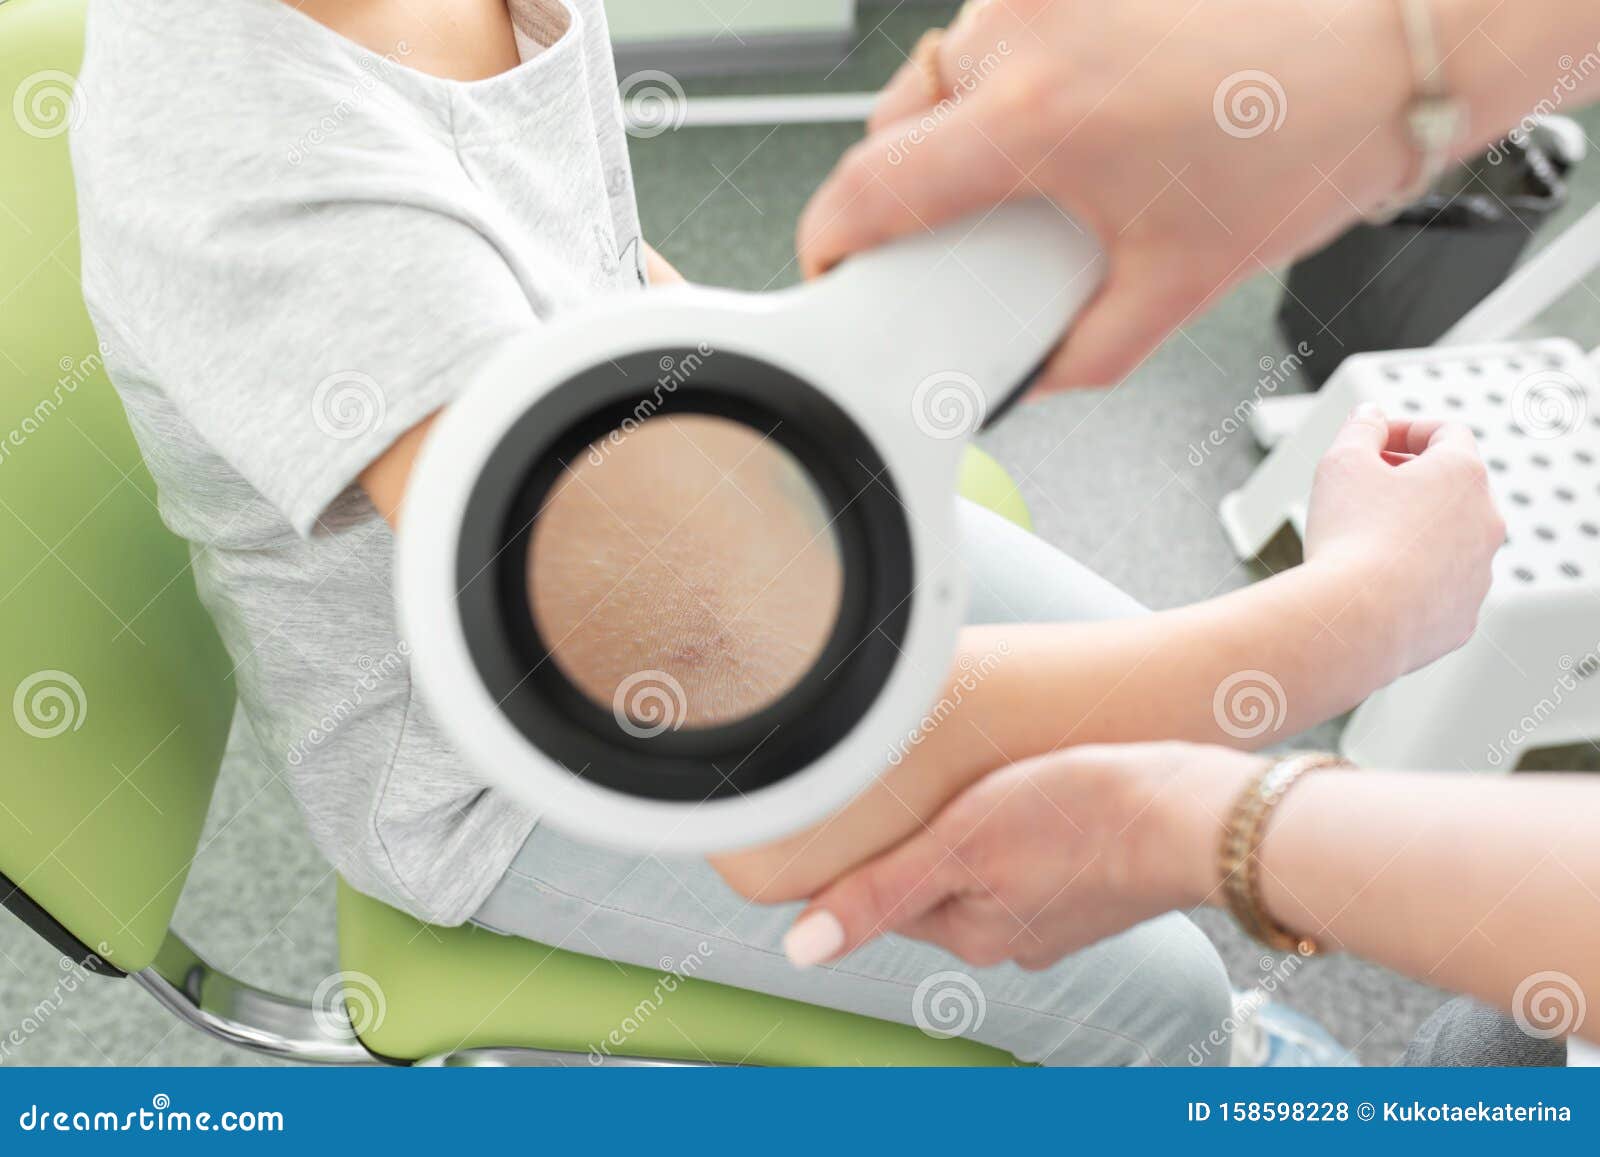 Pediatric Dermatologist Examines A Girl With A ...